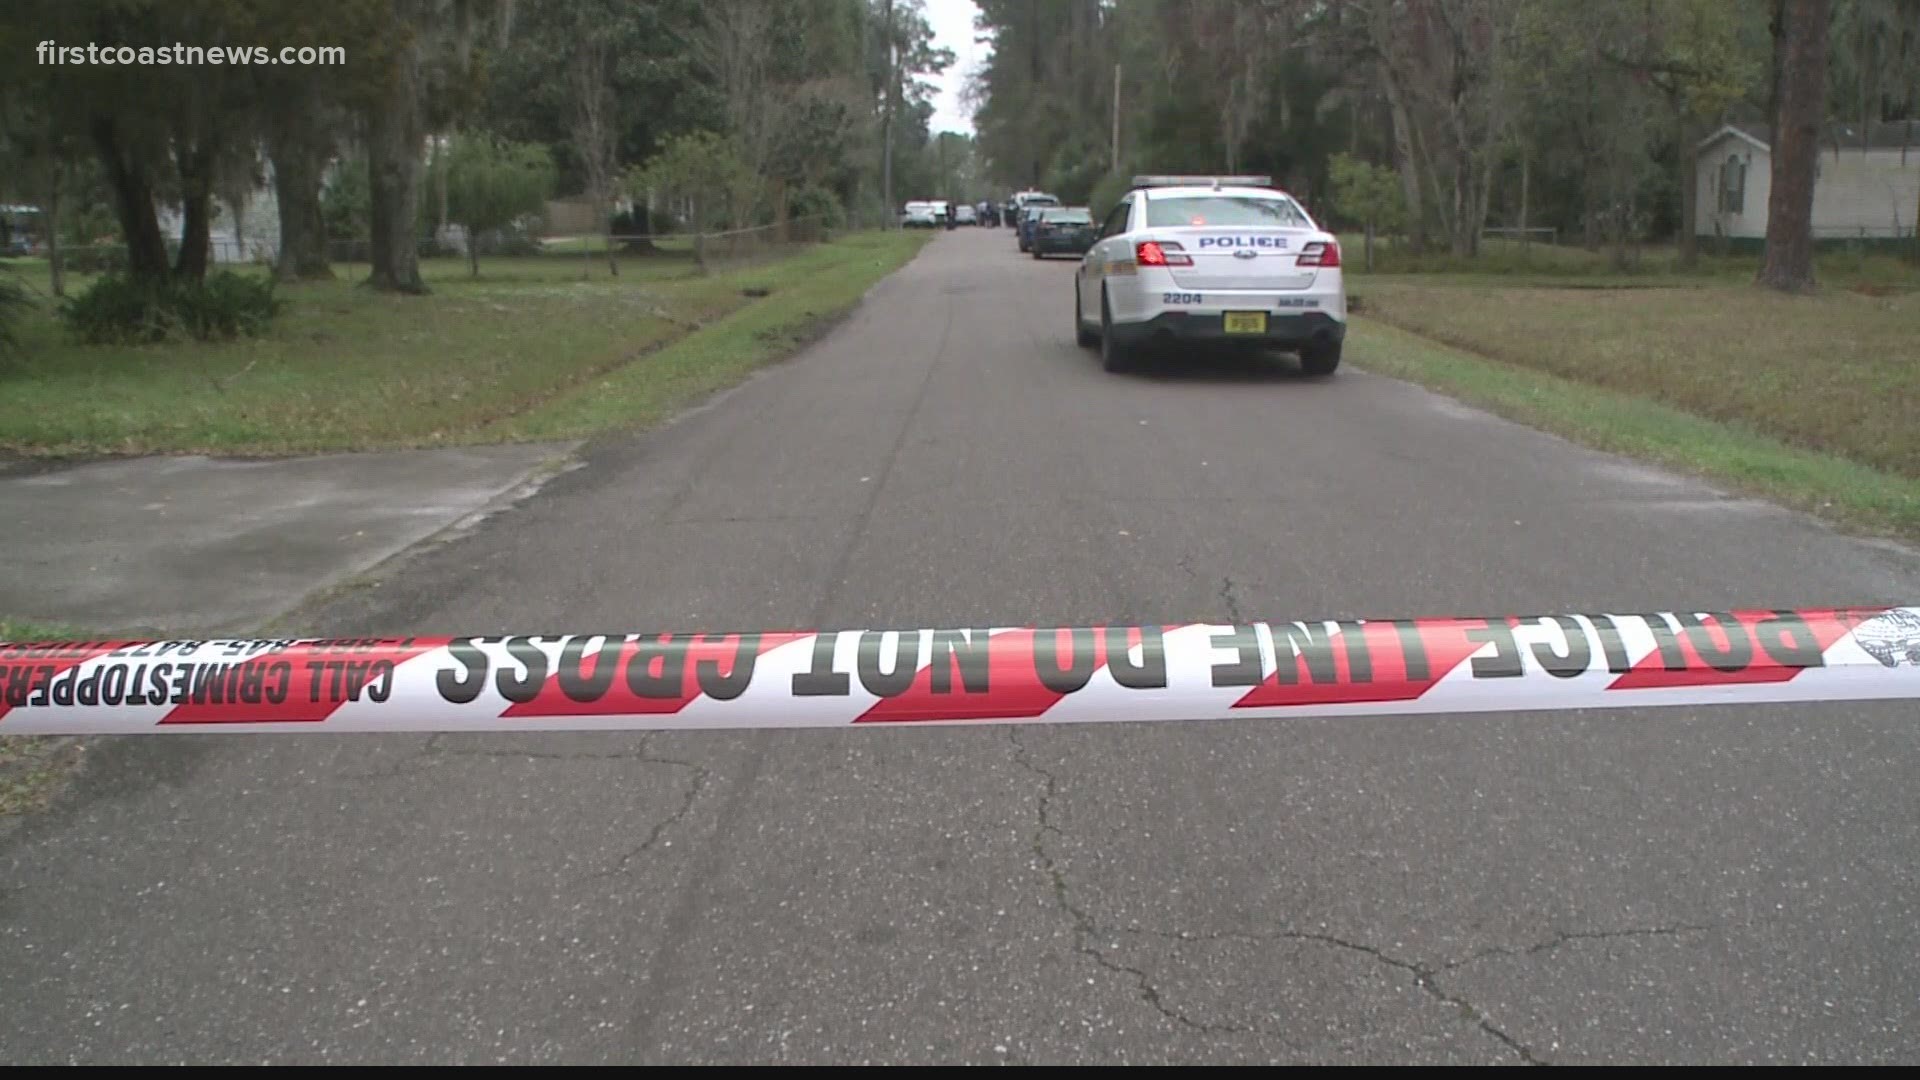 If you have any information on any of the three shootings, you can call JSO or Crime Stoppers at 866-845-TIPS.